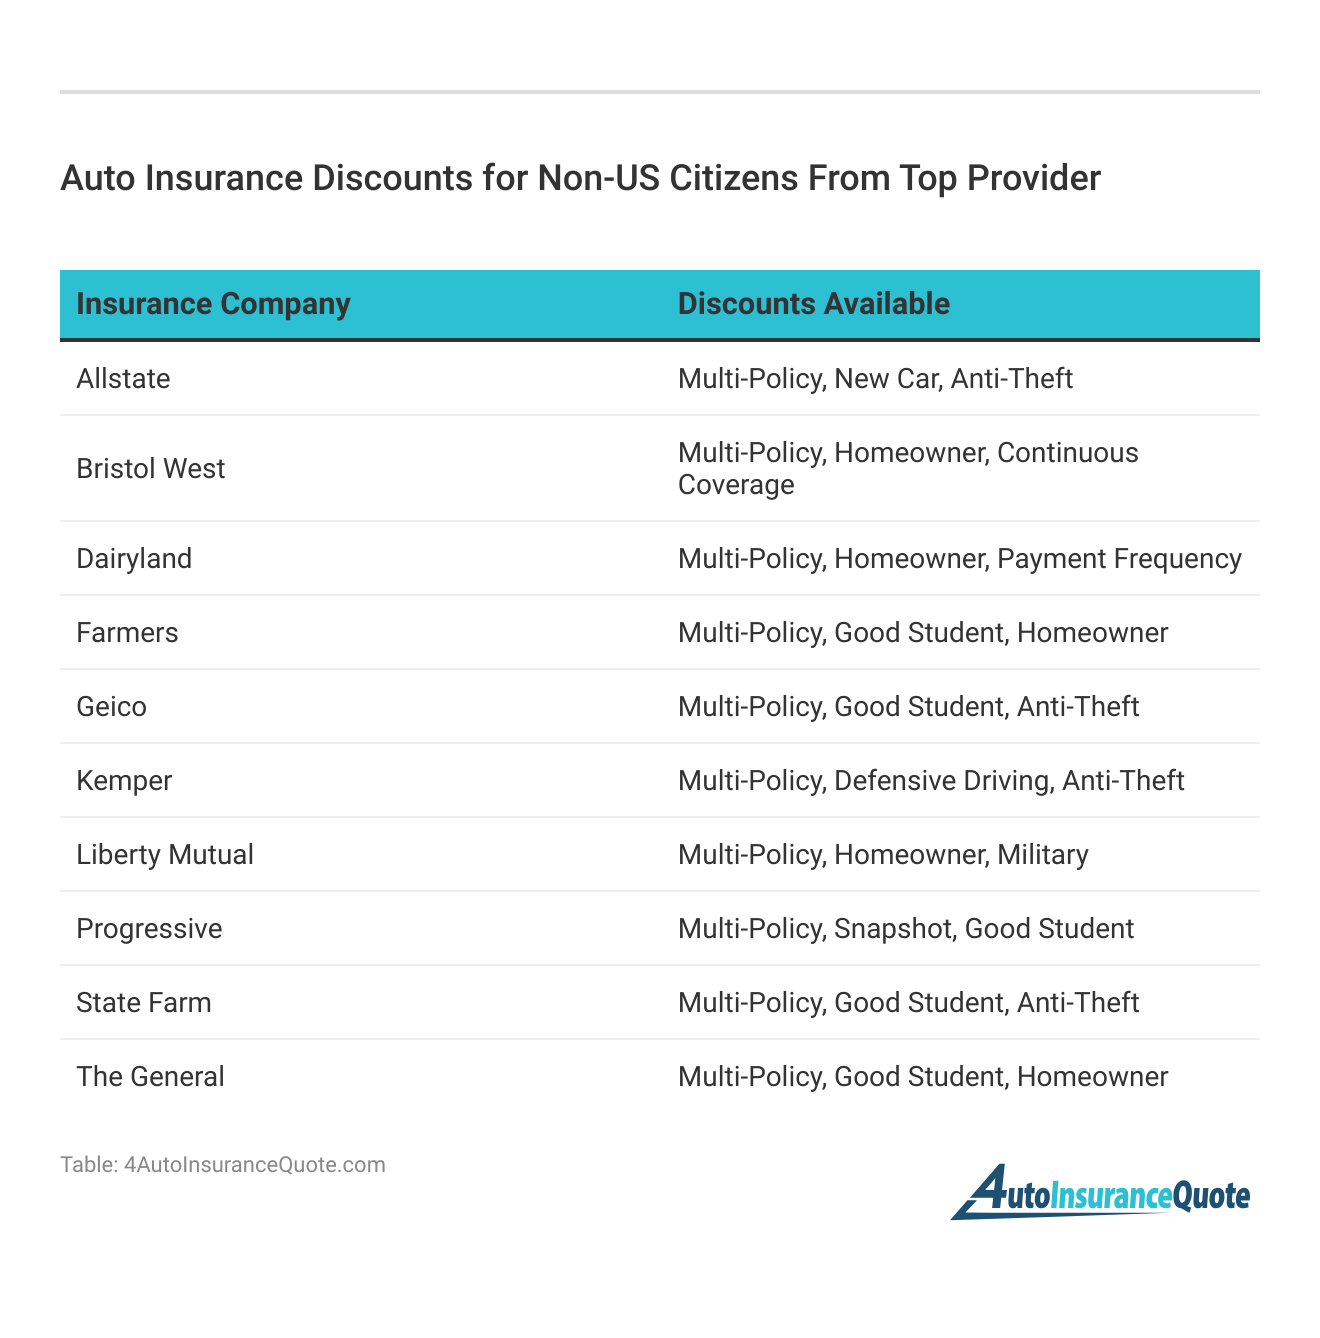 <h3>Auto Insurance Discounts for Non-US Citizens From Top Provider</h3>